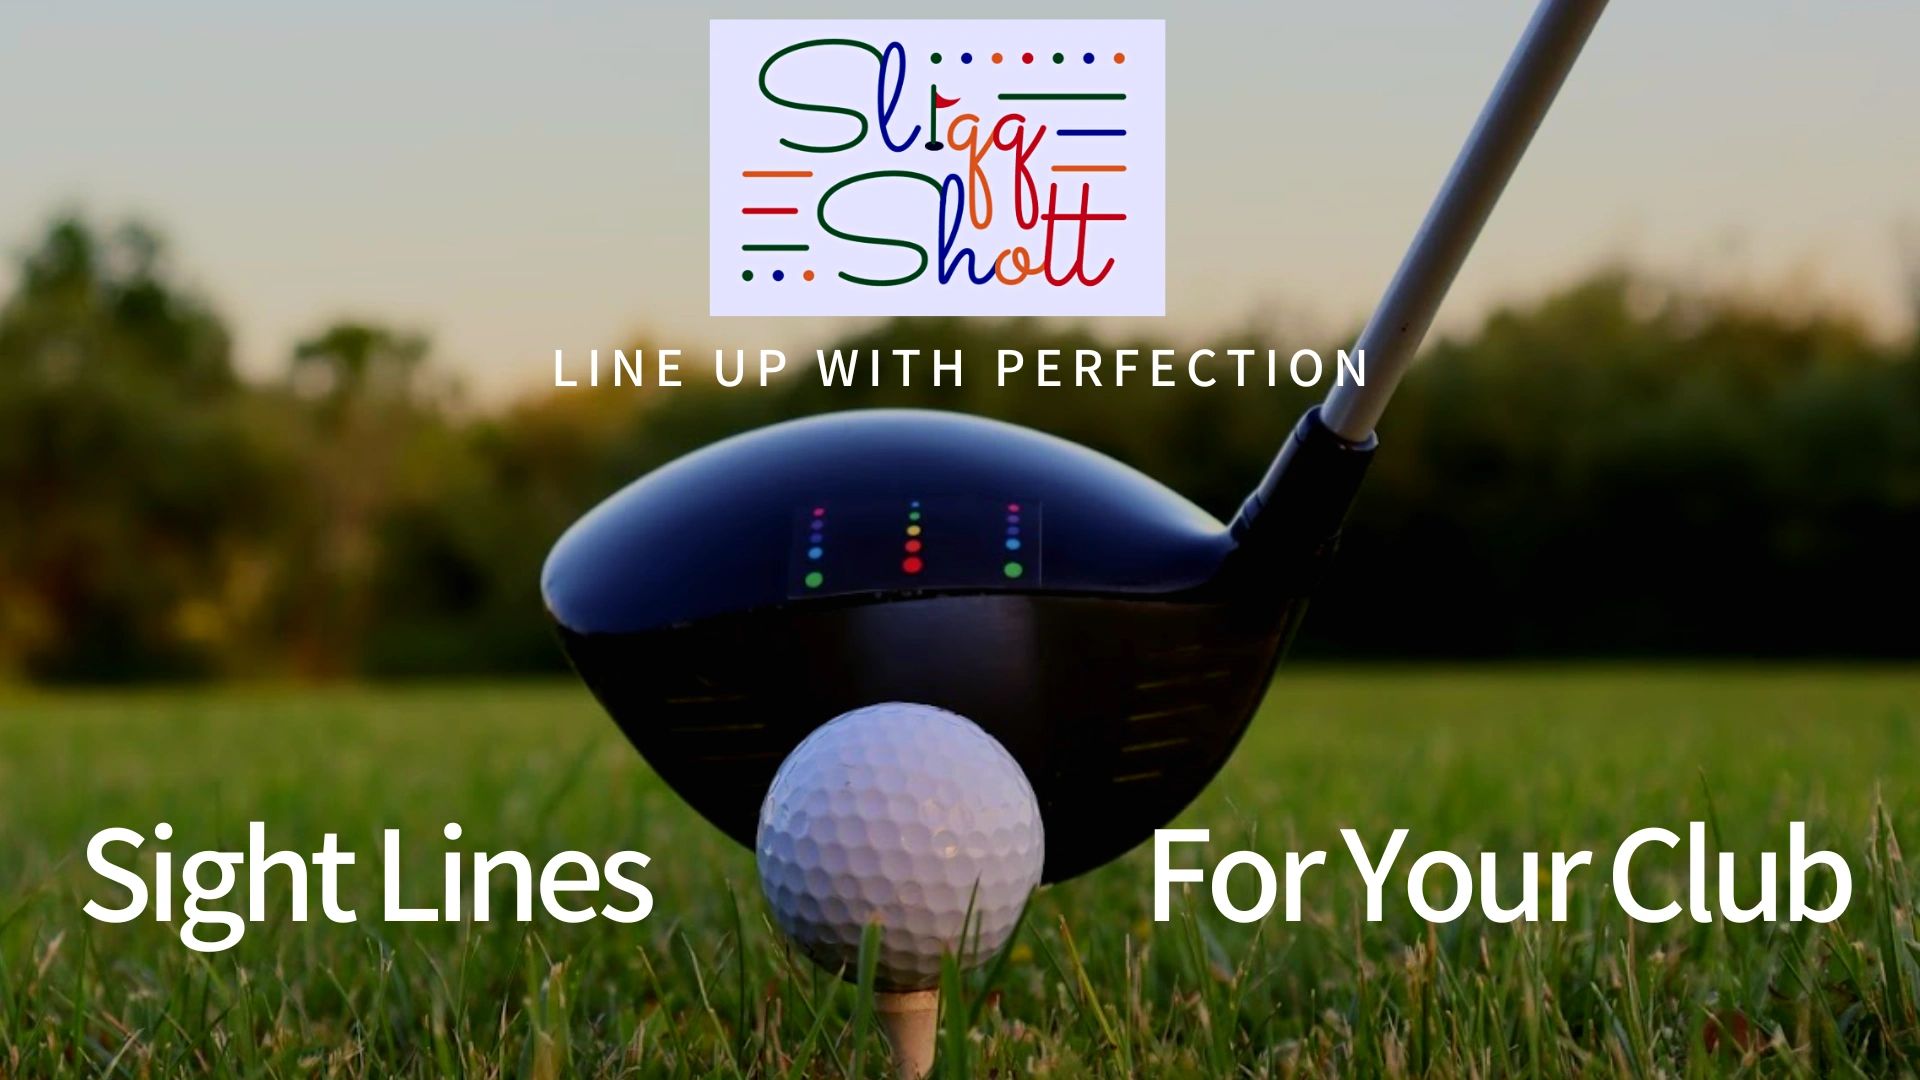 Golf improvement tool sightline accuracy consistency putting driving hitting golf ball golf clubs